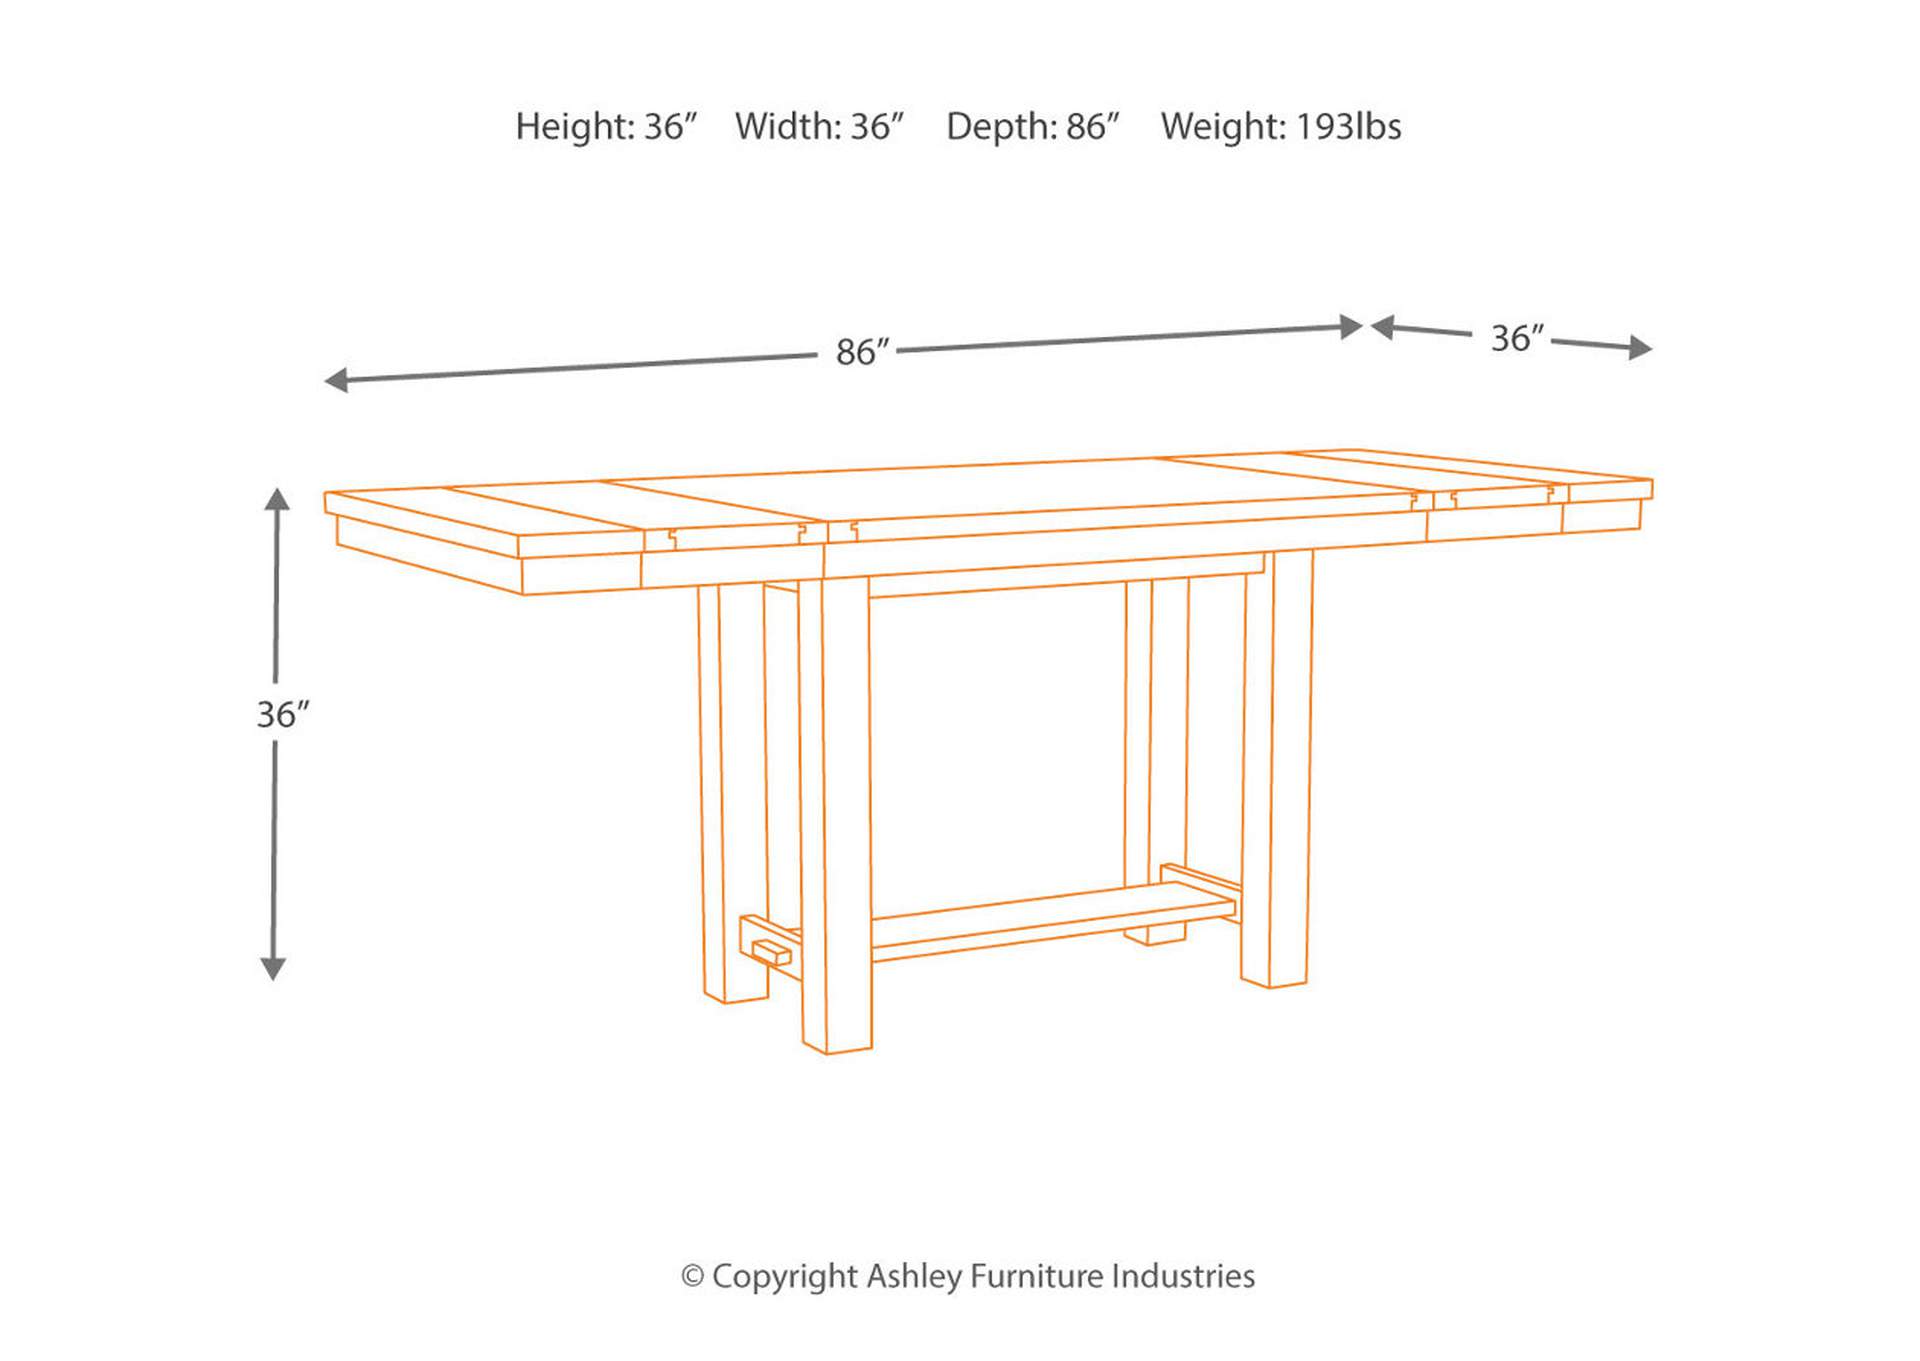 Moriville Counter Height Dining Extension Table,Signature Design By Ashley